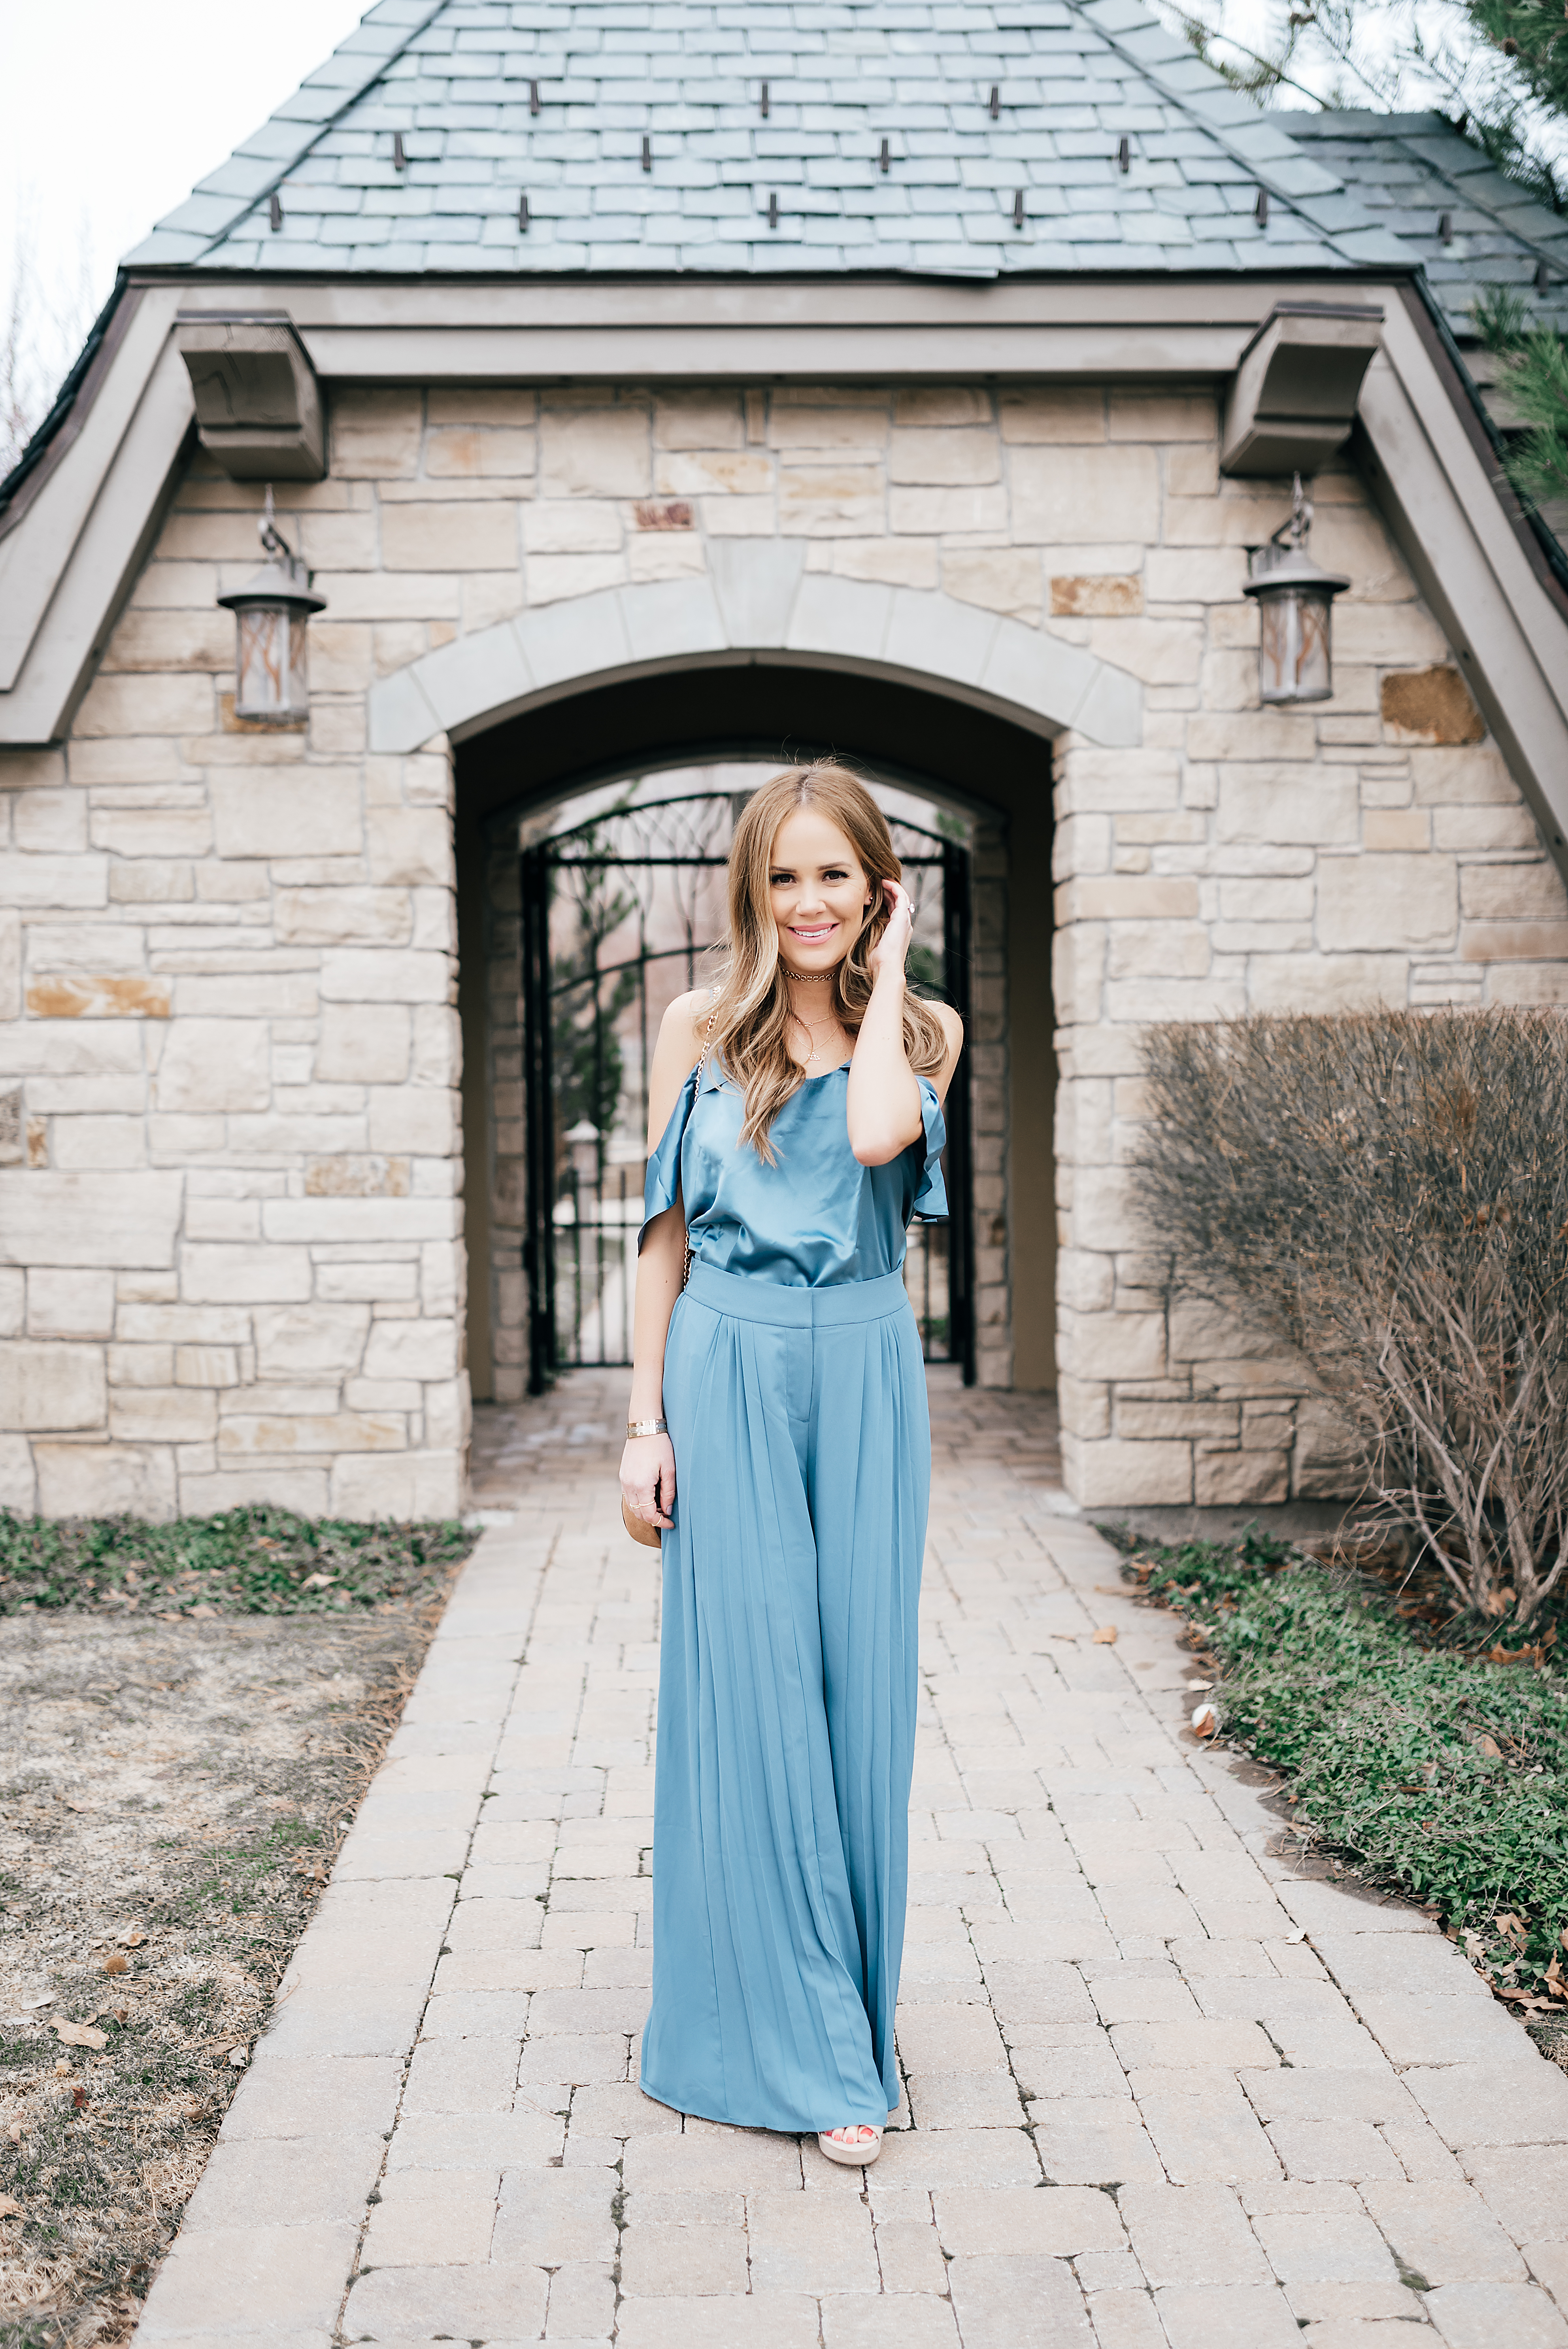 Lauren Conrad Collection for Kohl's Blue Palazzo Pants • The Fashion Fuse